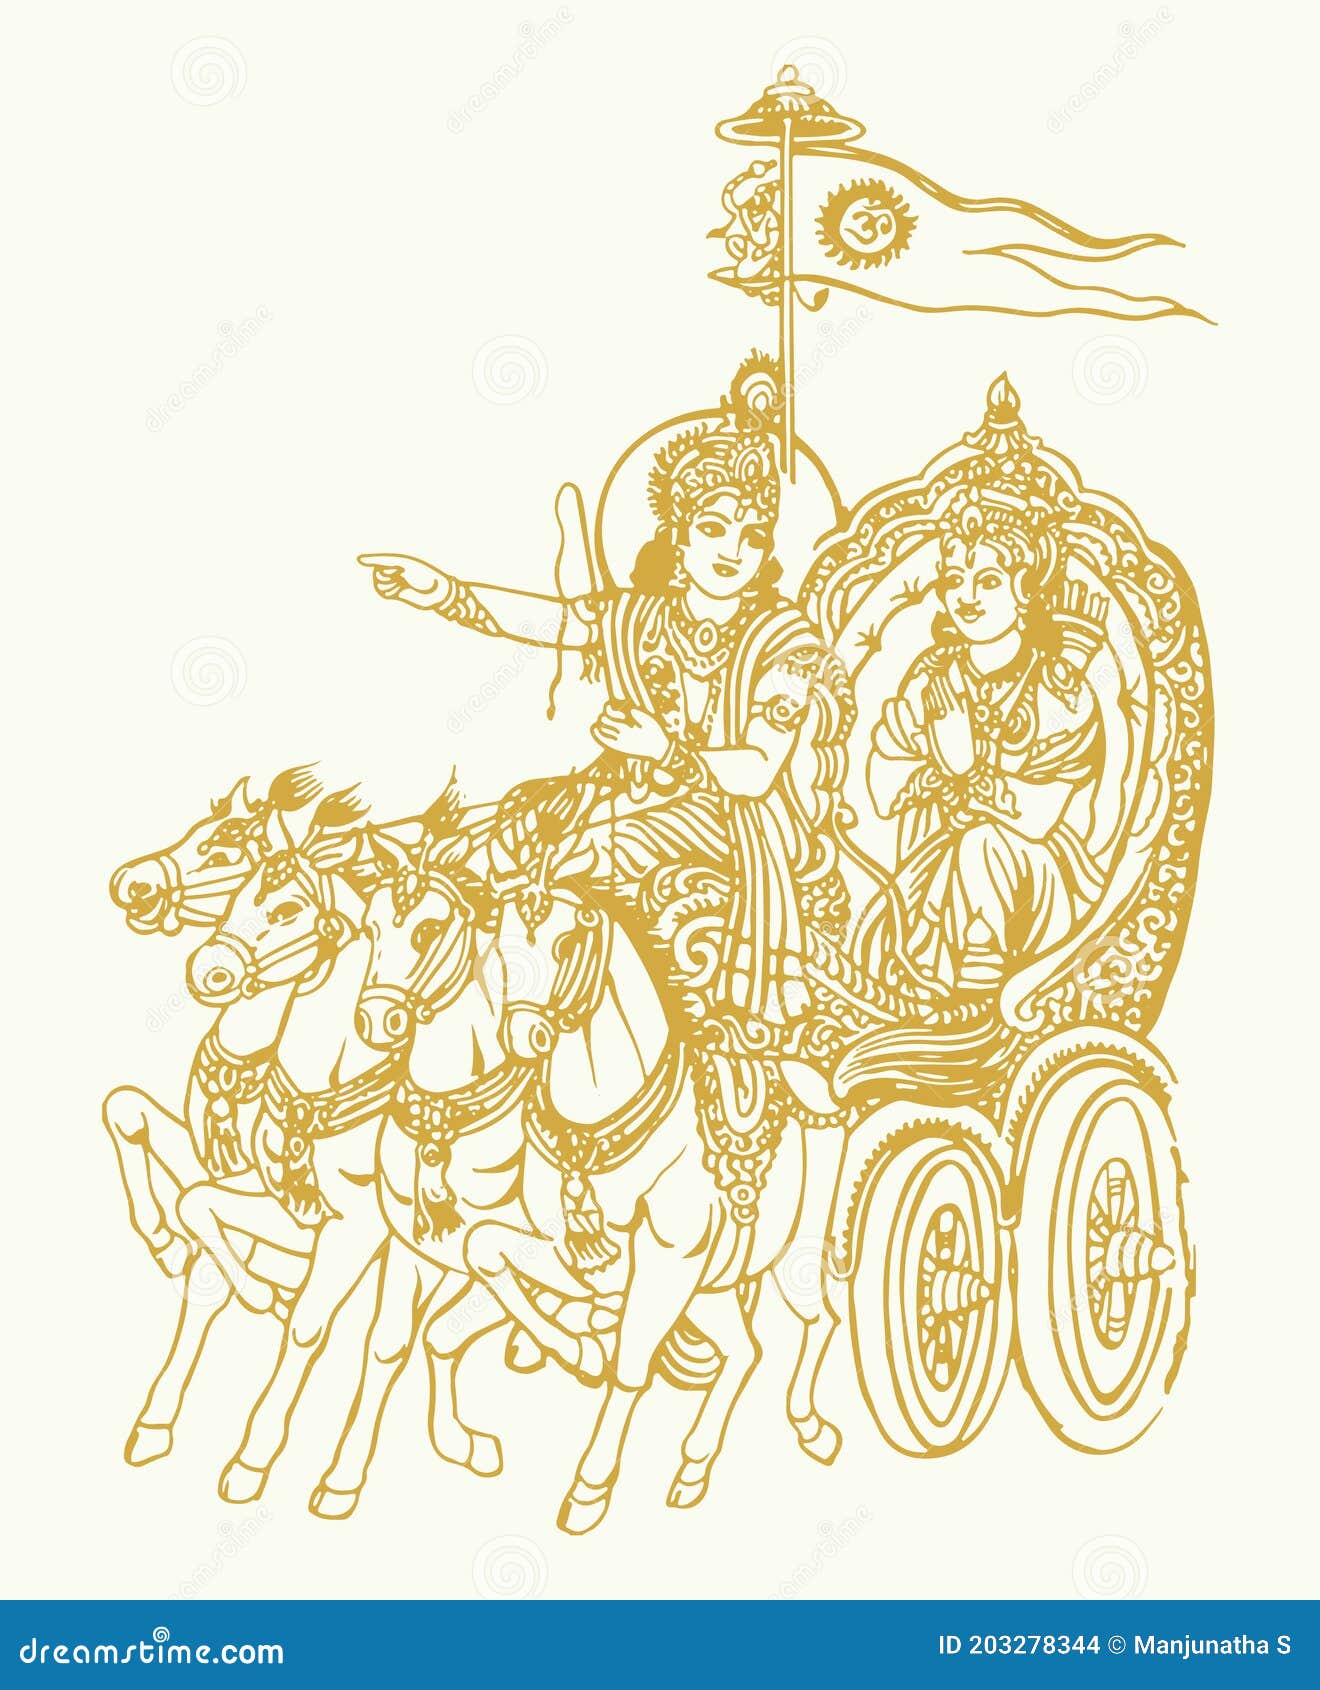 Drawing Worksheet For Preschool Kids With Easy Gaming Level Of Difficulty  Simple Educational Game For Kids To Finish The Picture By Sample And Draw  The Red And Gold Chariot Royalty Free SVG